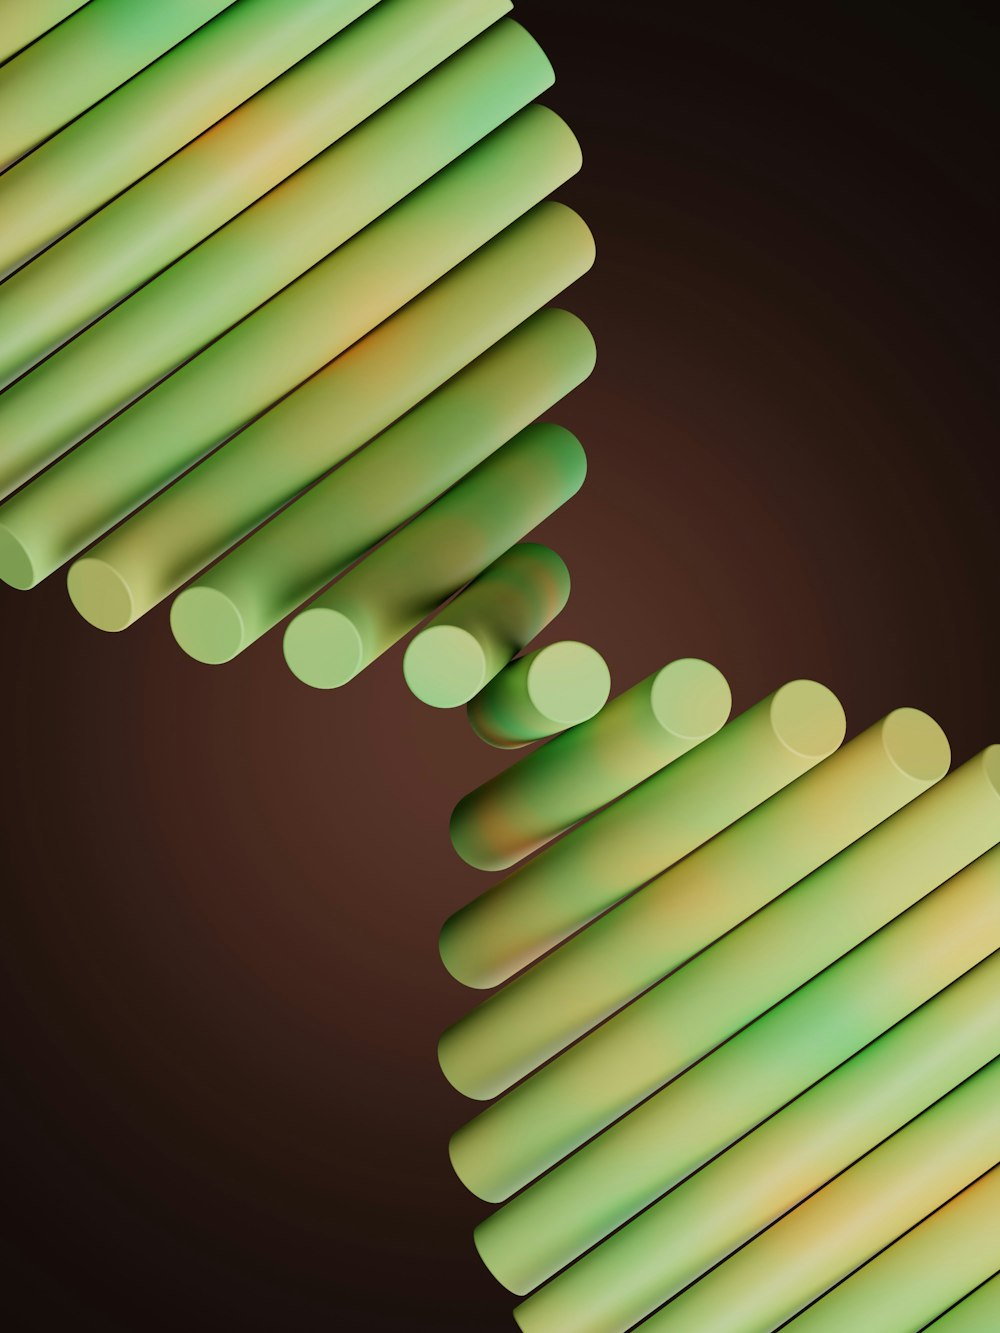 an abstract image of a green and yellow object